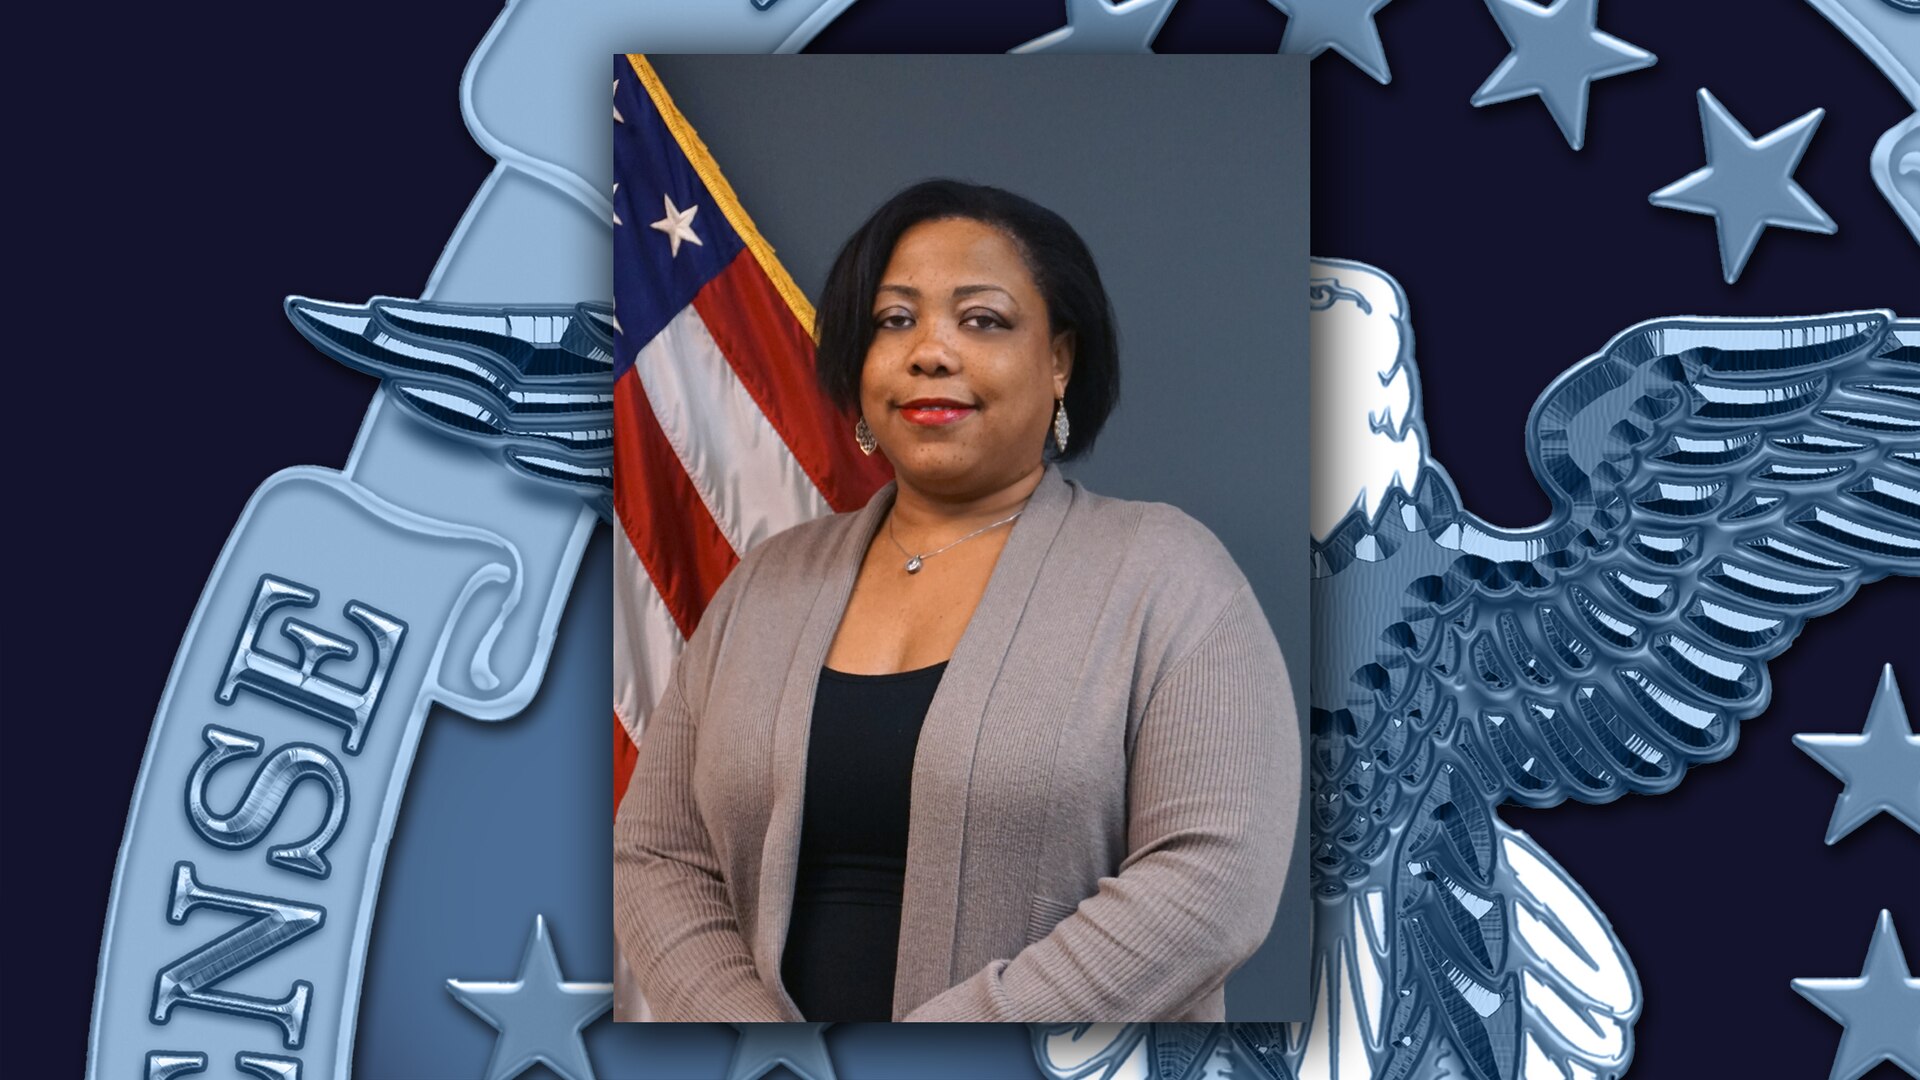 San Joaquin’s Foster selected for the 2020 Blacks in Government Military Meritorious Service Award